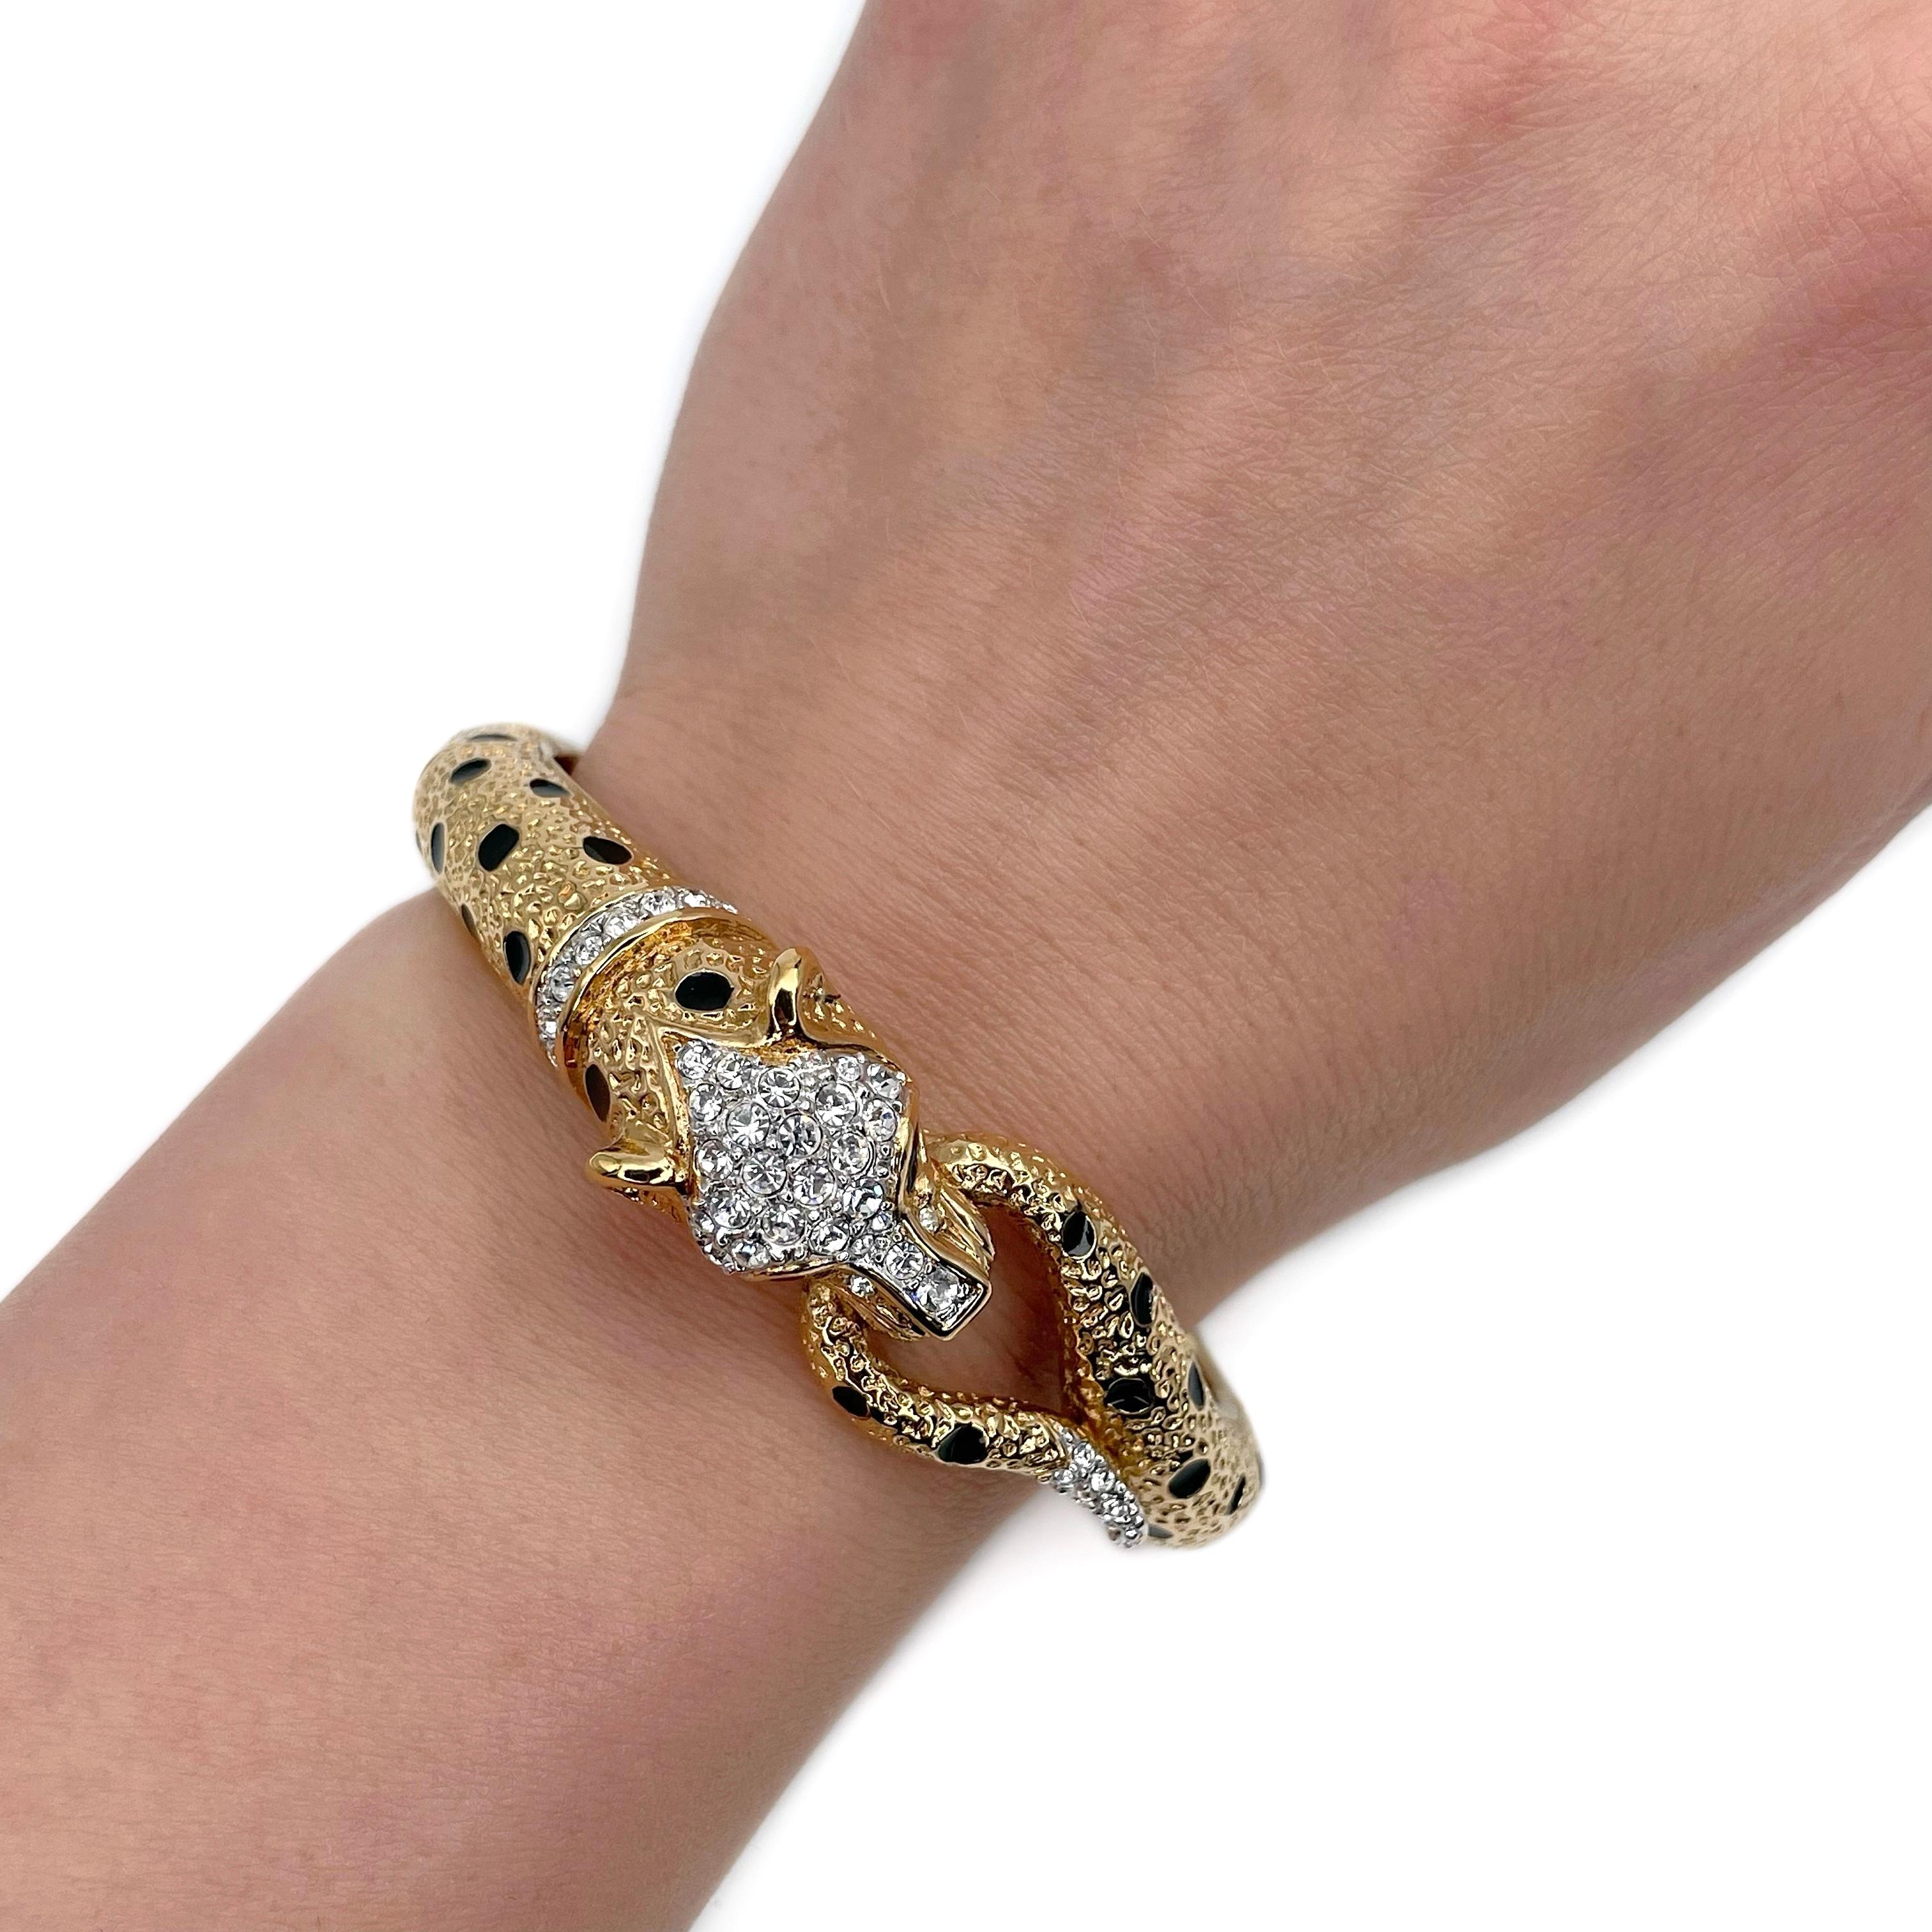 This is a vintage leopard hinged bangle bracelet designed by Attwood & Sawyer in 1980’s. The piece is crafted in base metal and is gold plated. It is adorned with black enamel and clear crystals. 

Signed: “A&S” (shown in photos).
Inner